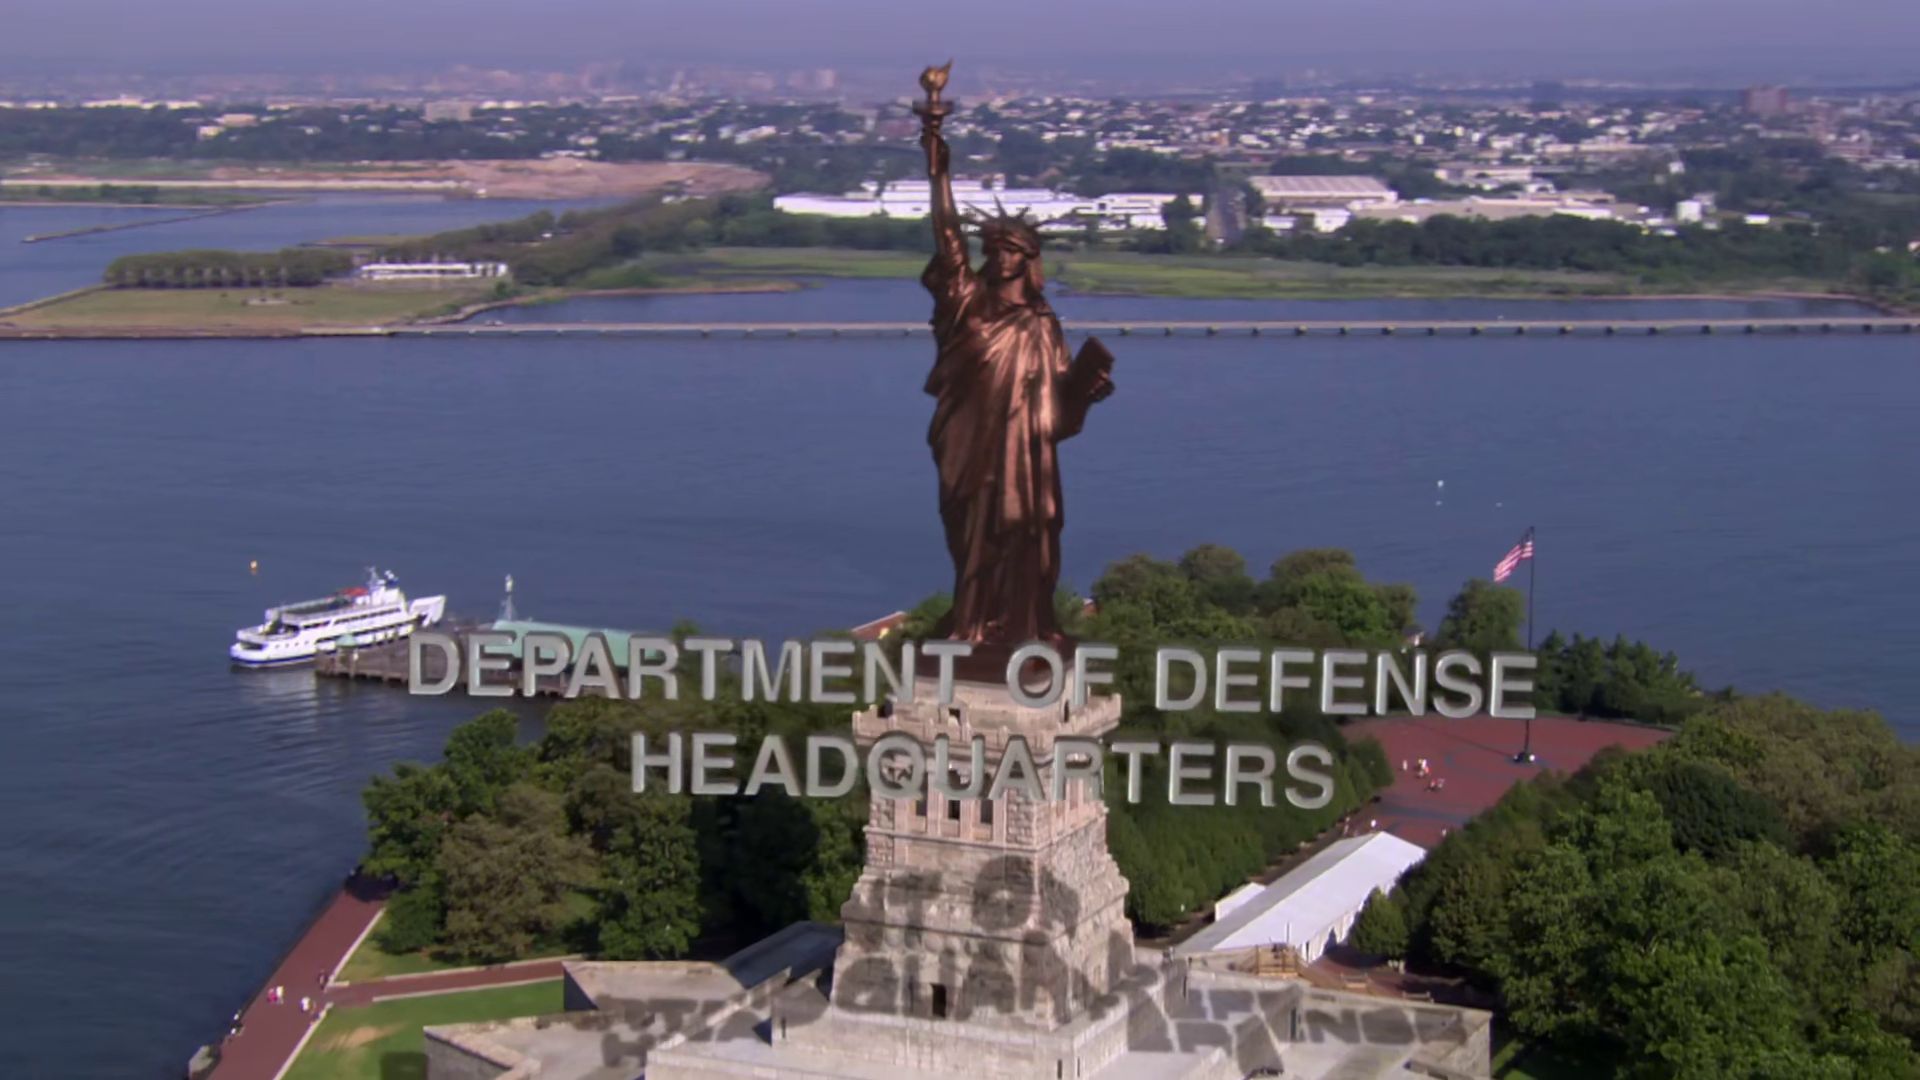 Difference: Department of Defense